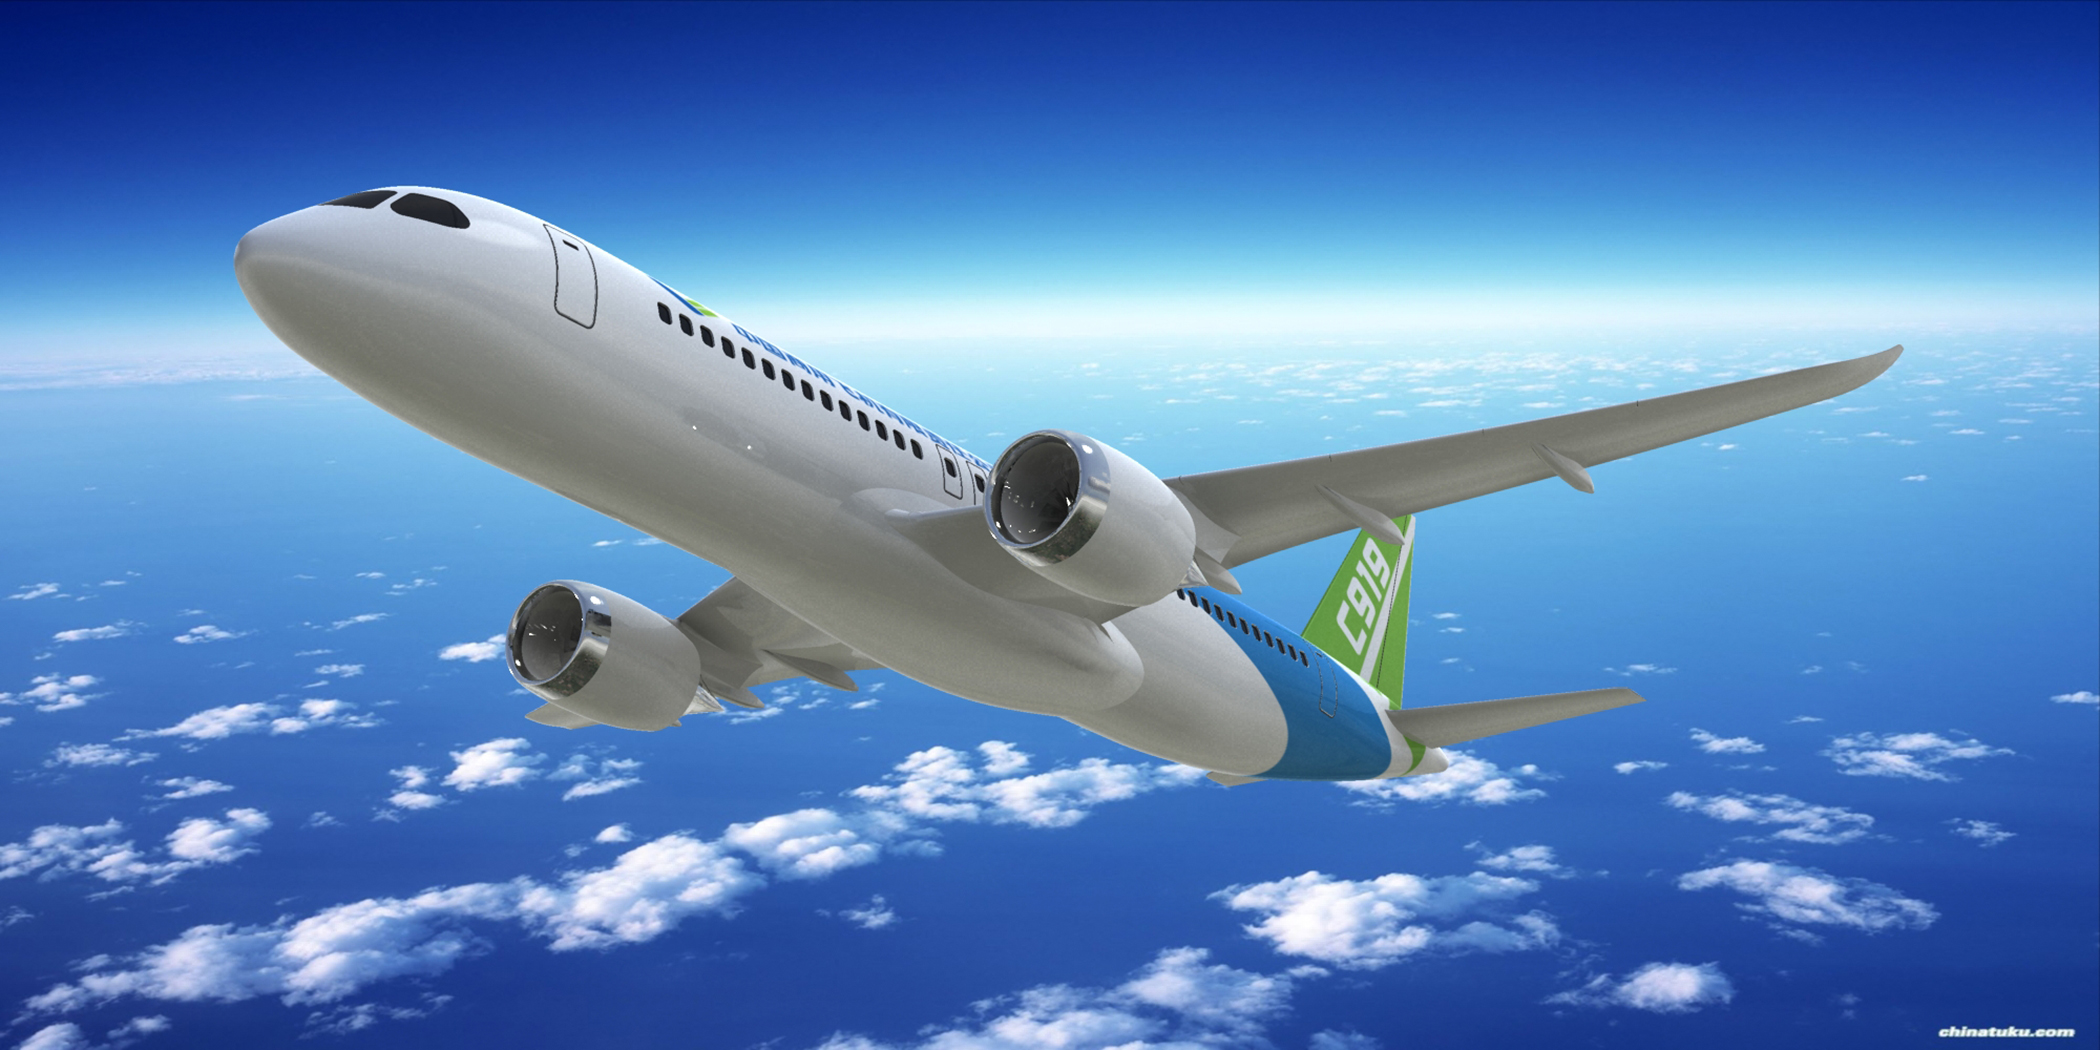 The Commercial Aircraft Corporation of China, Ltd. (COMAC) has selected GORE™ SKYFLEX™ Aerospace Materials (tapes and gaskets) for use in its first large commercial aircraft, the C919. Photo: COMAC